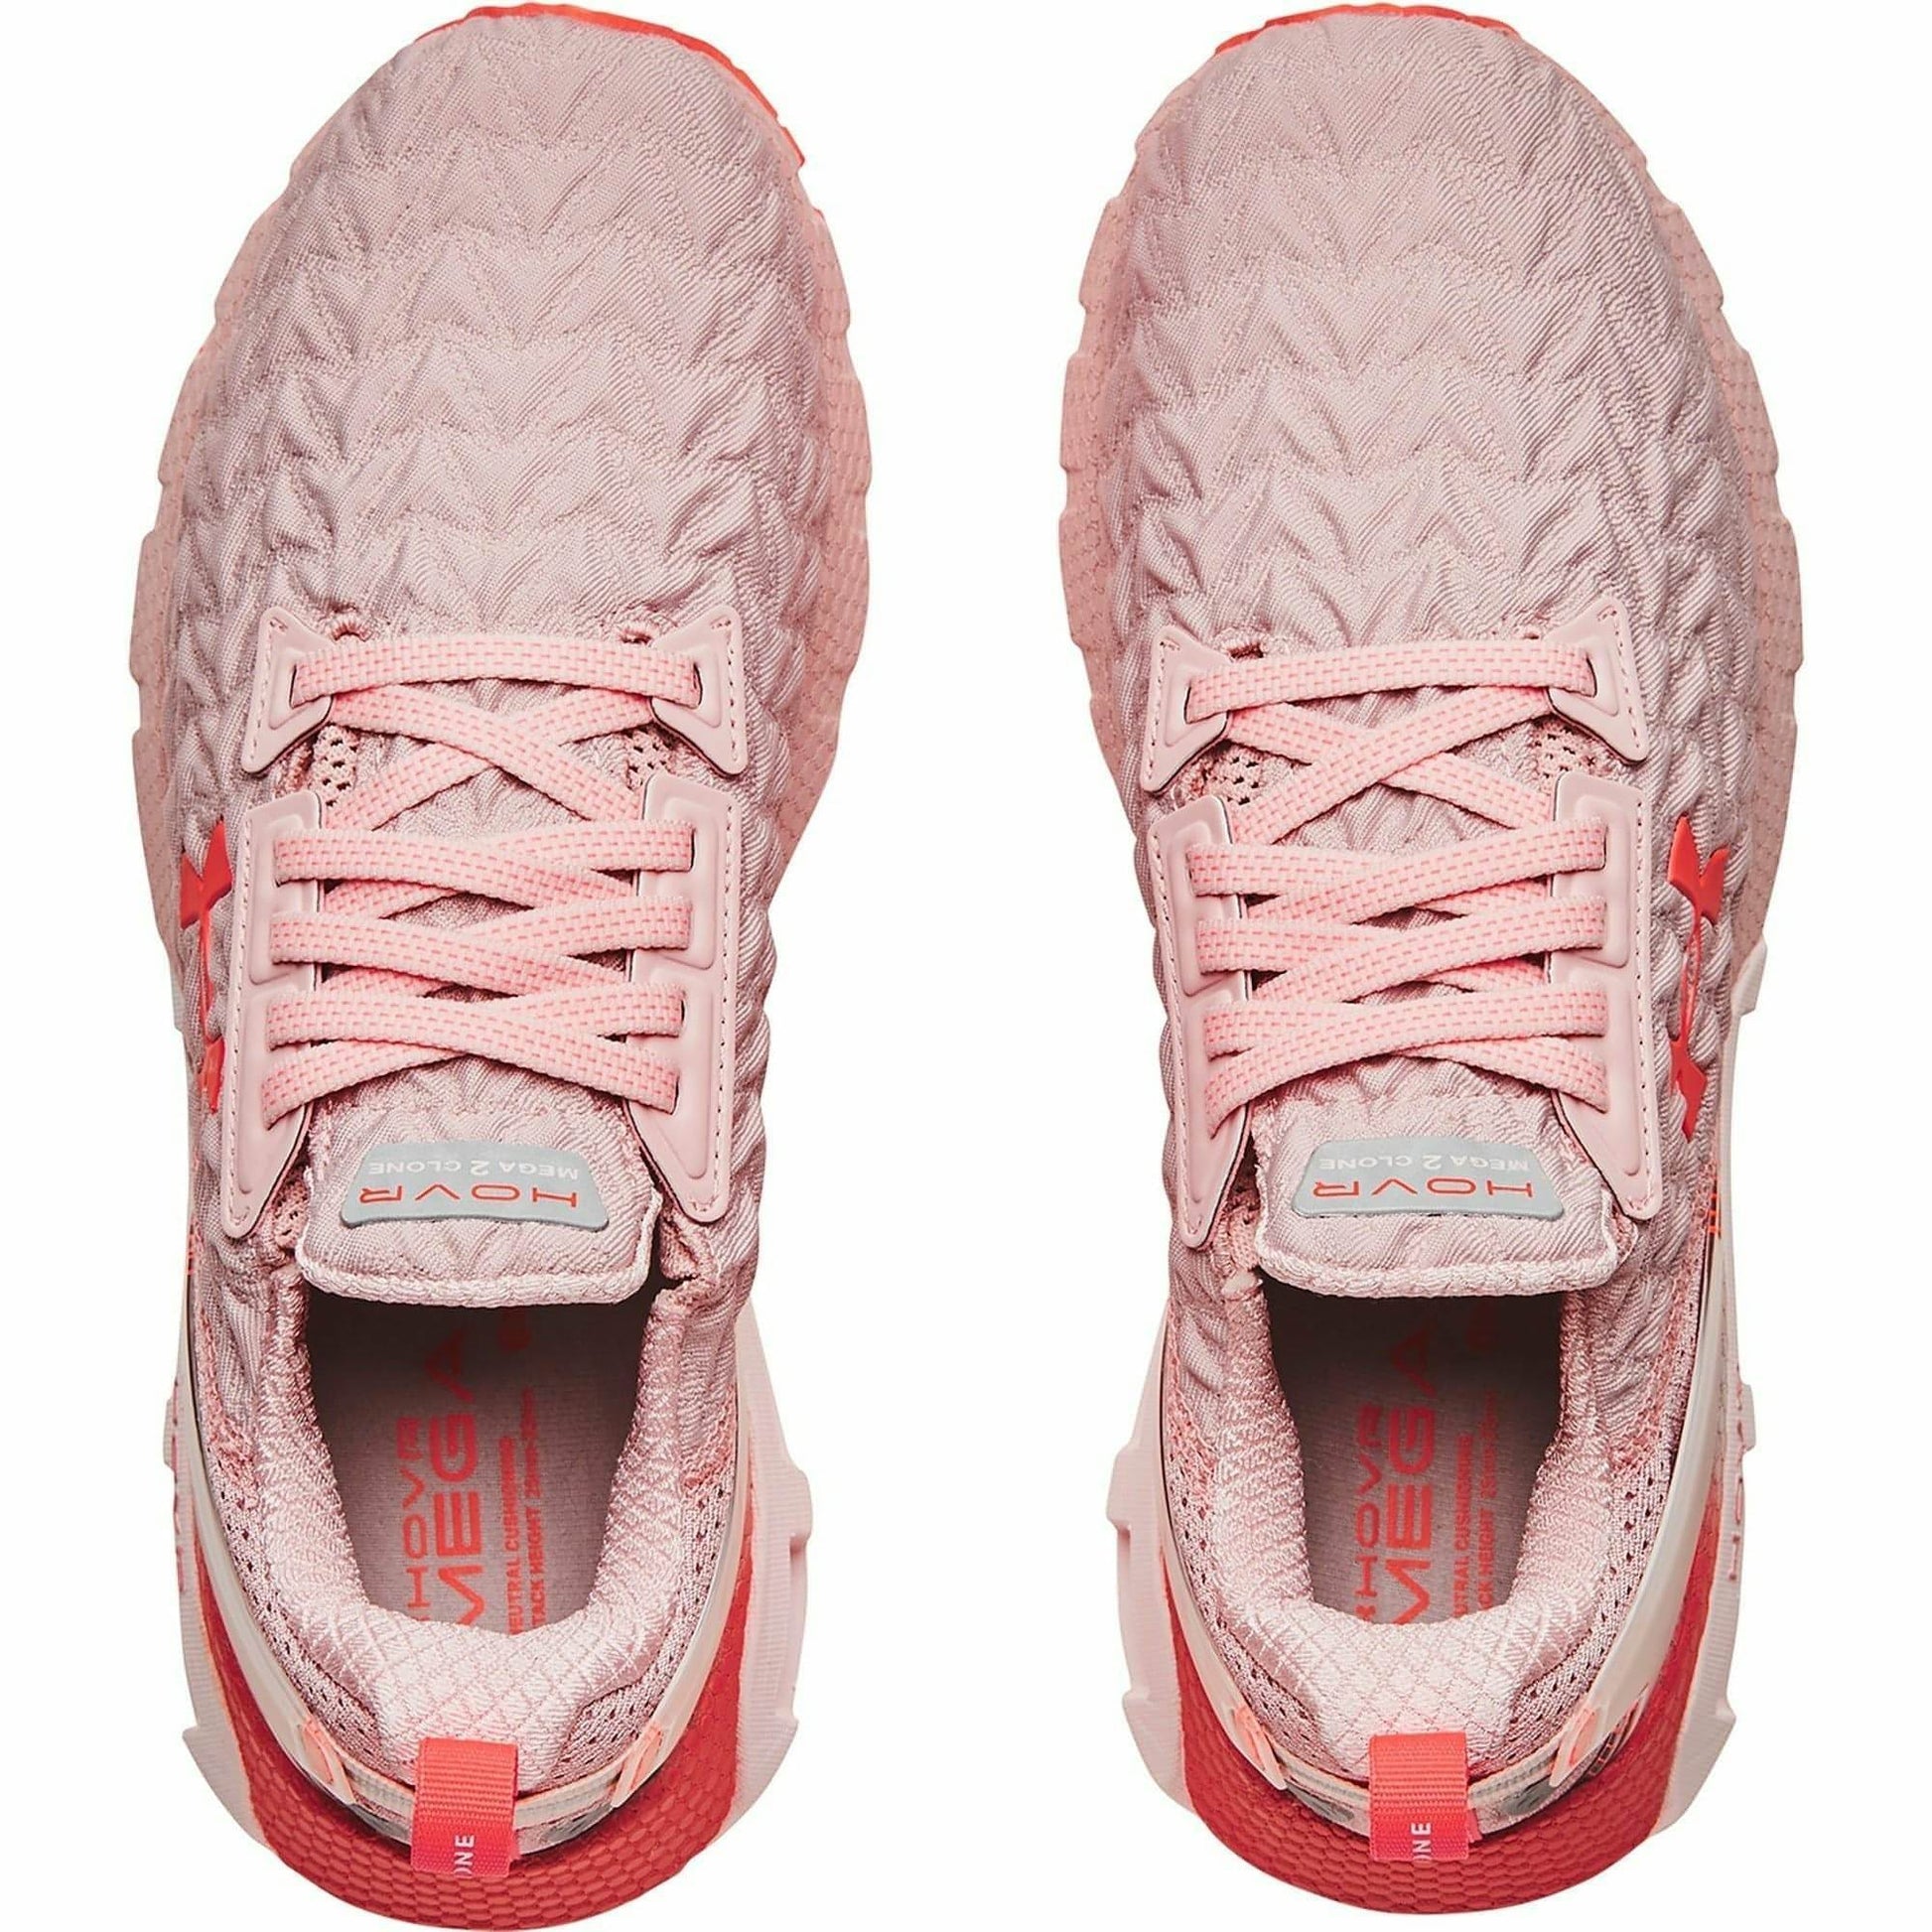 Under Armour HOVR Mega 2 Clone Womens Running Shoes - Pink - Start Fitness